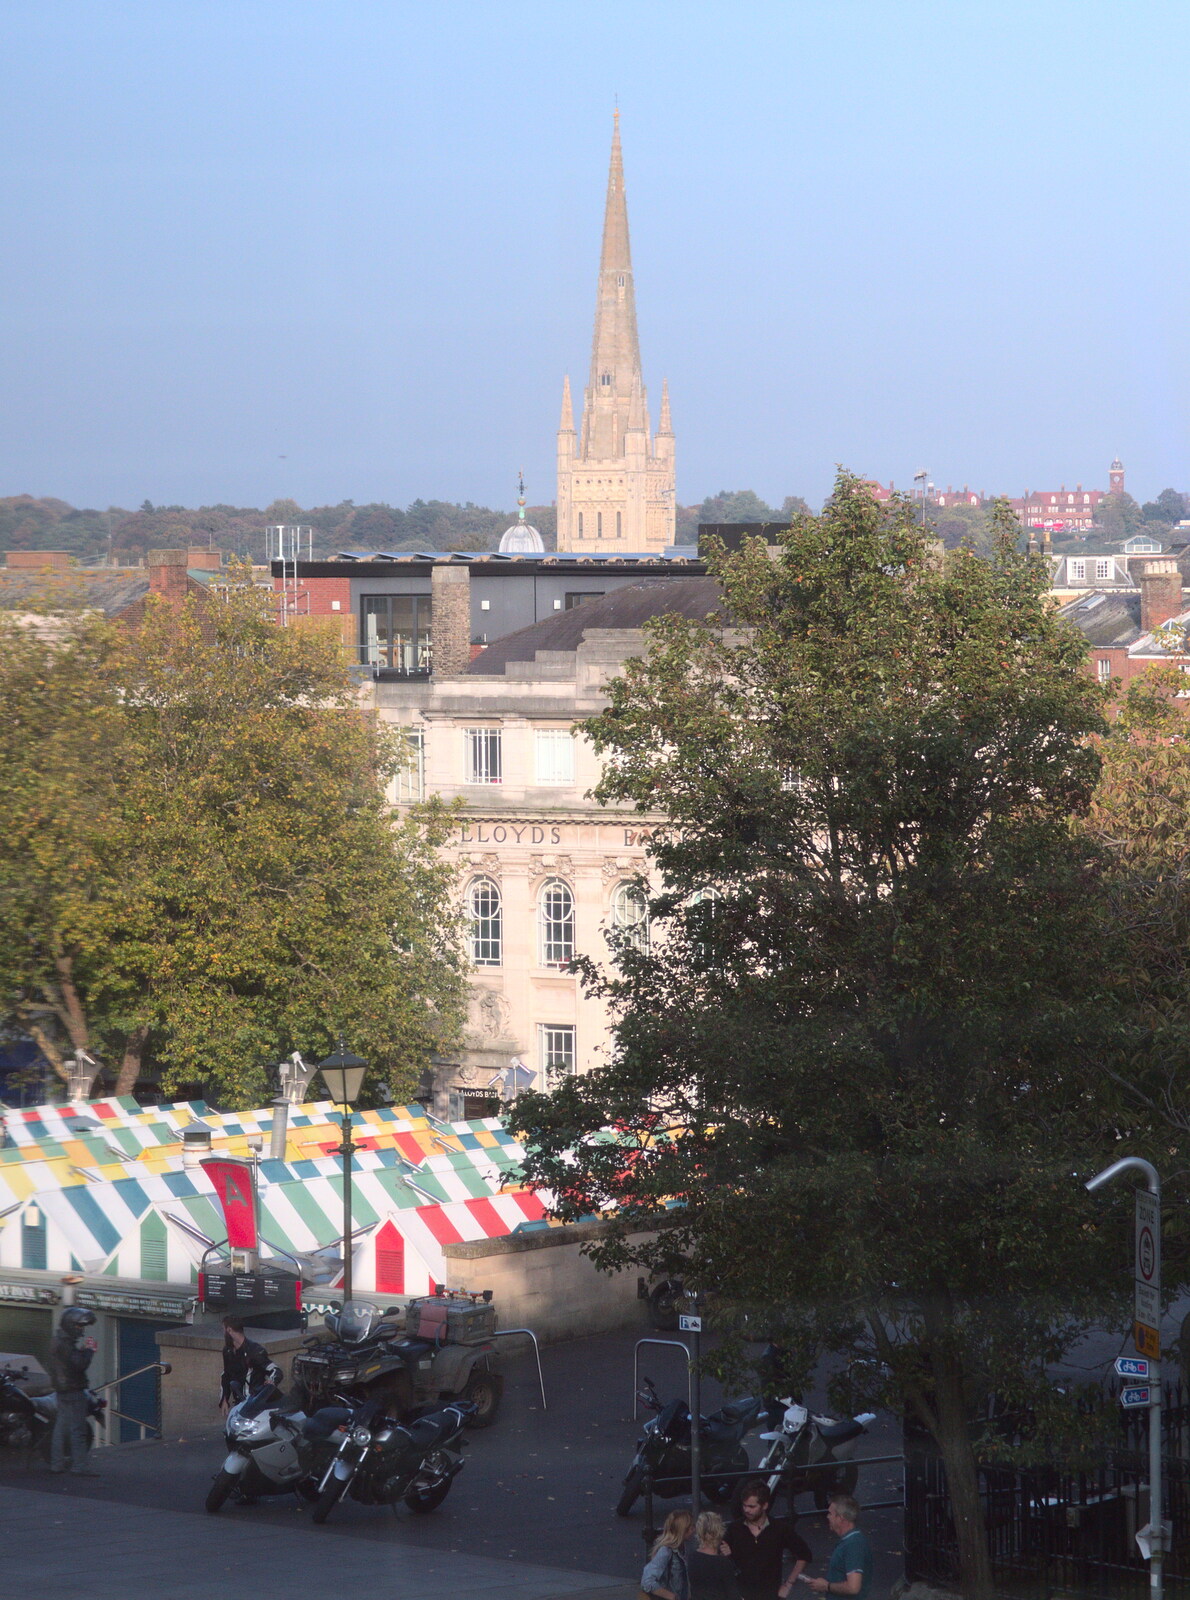 A view of Lloyds Bank and the Cathedral from Trafalgar Day and Pizza, Norwich, Norfolk - 15th October 2017